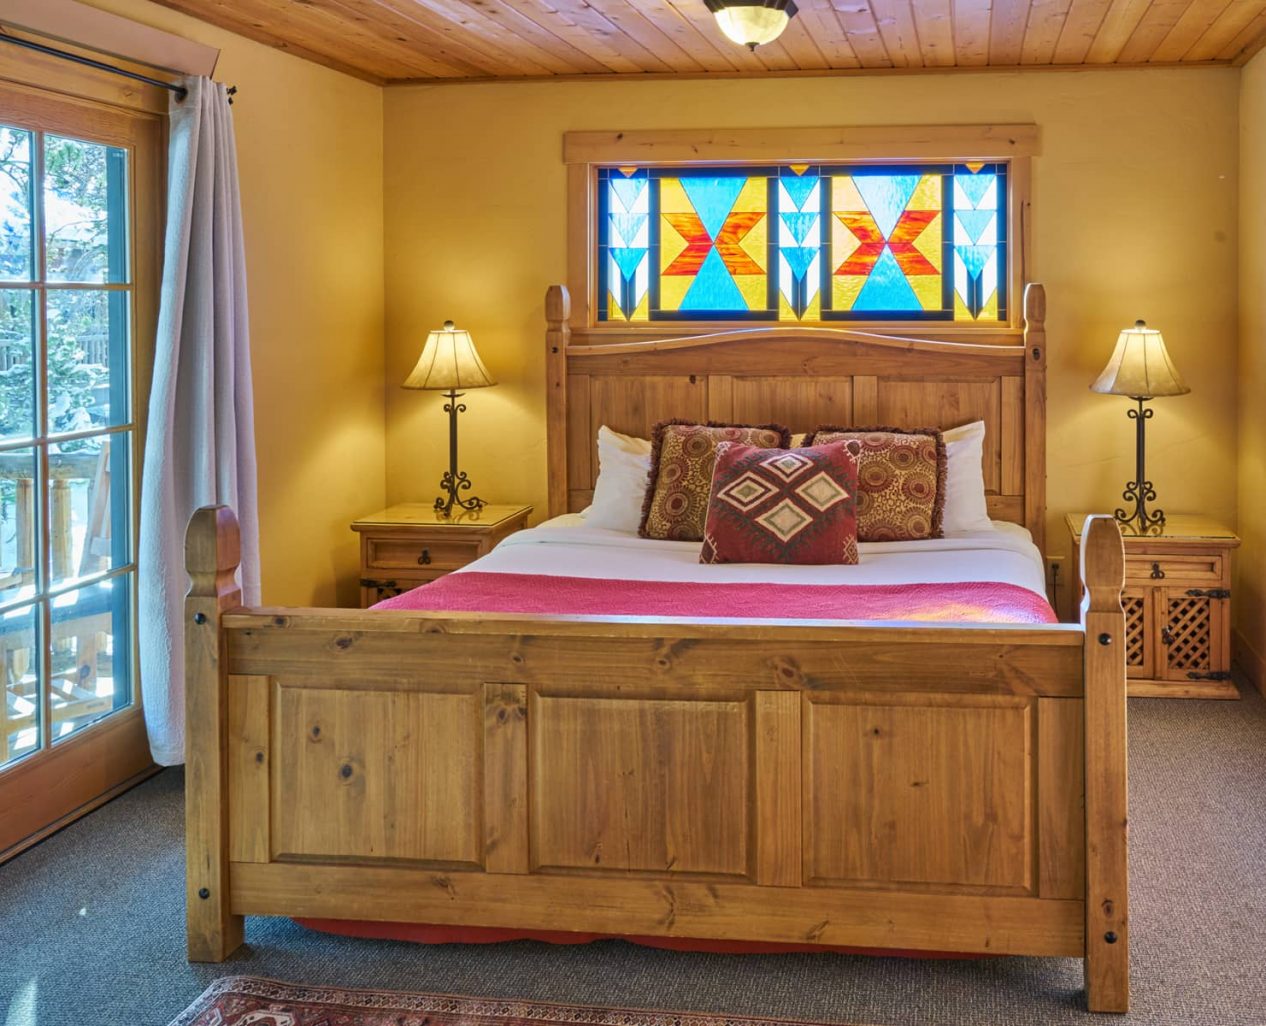 King Bed in the Mariposa Cabin with door leading to a private deck